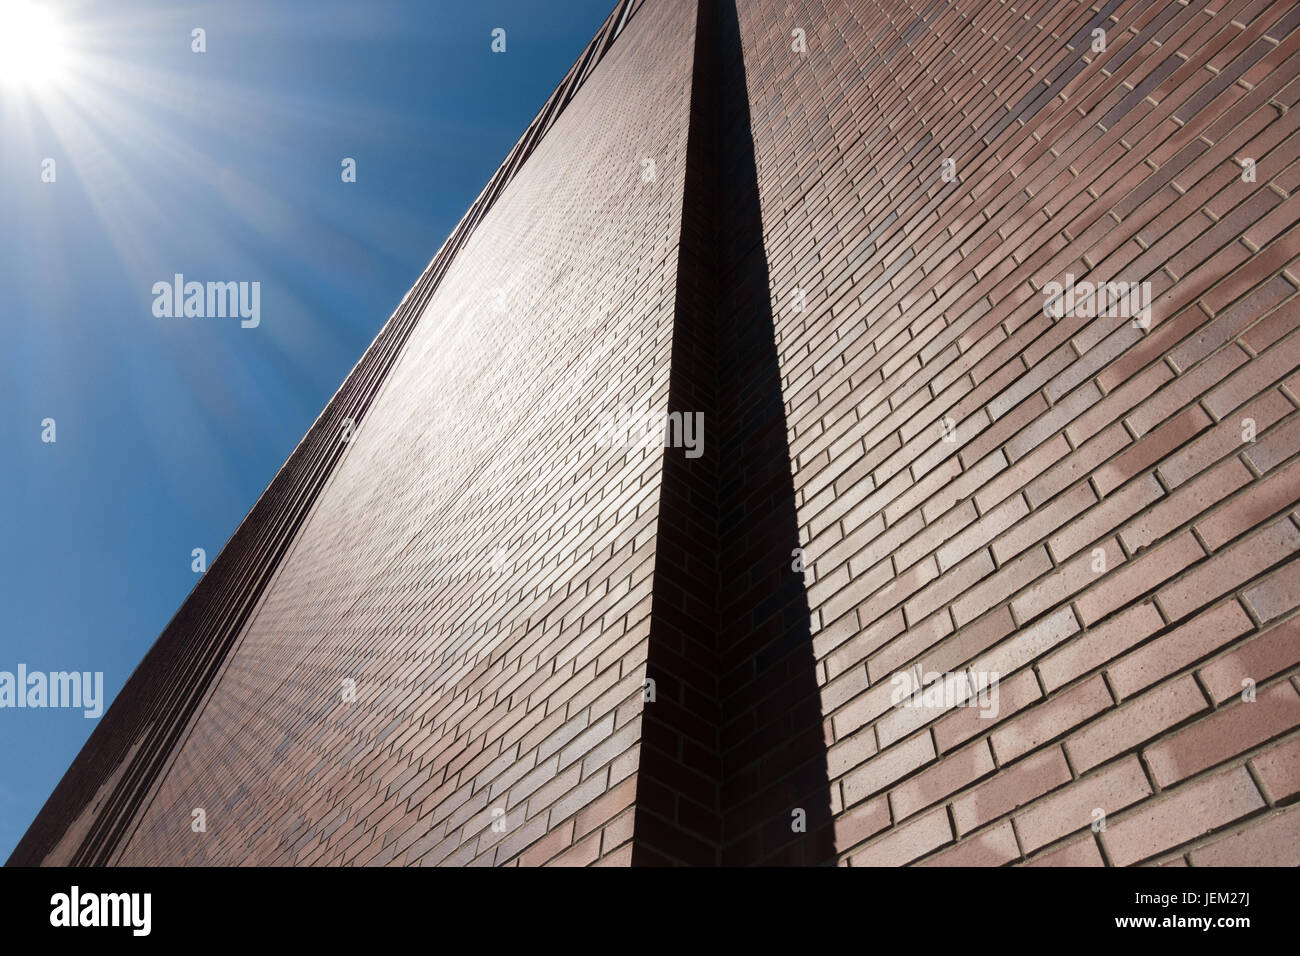 Red brick wall facade against blue sky and sun beams. Stock Photo